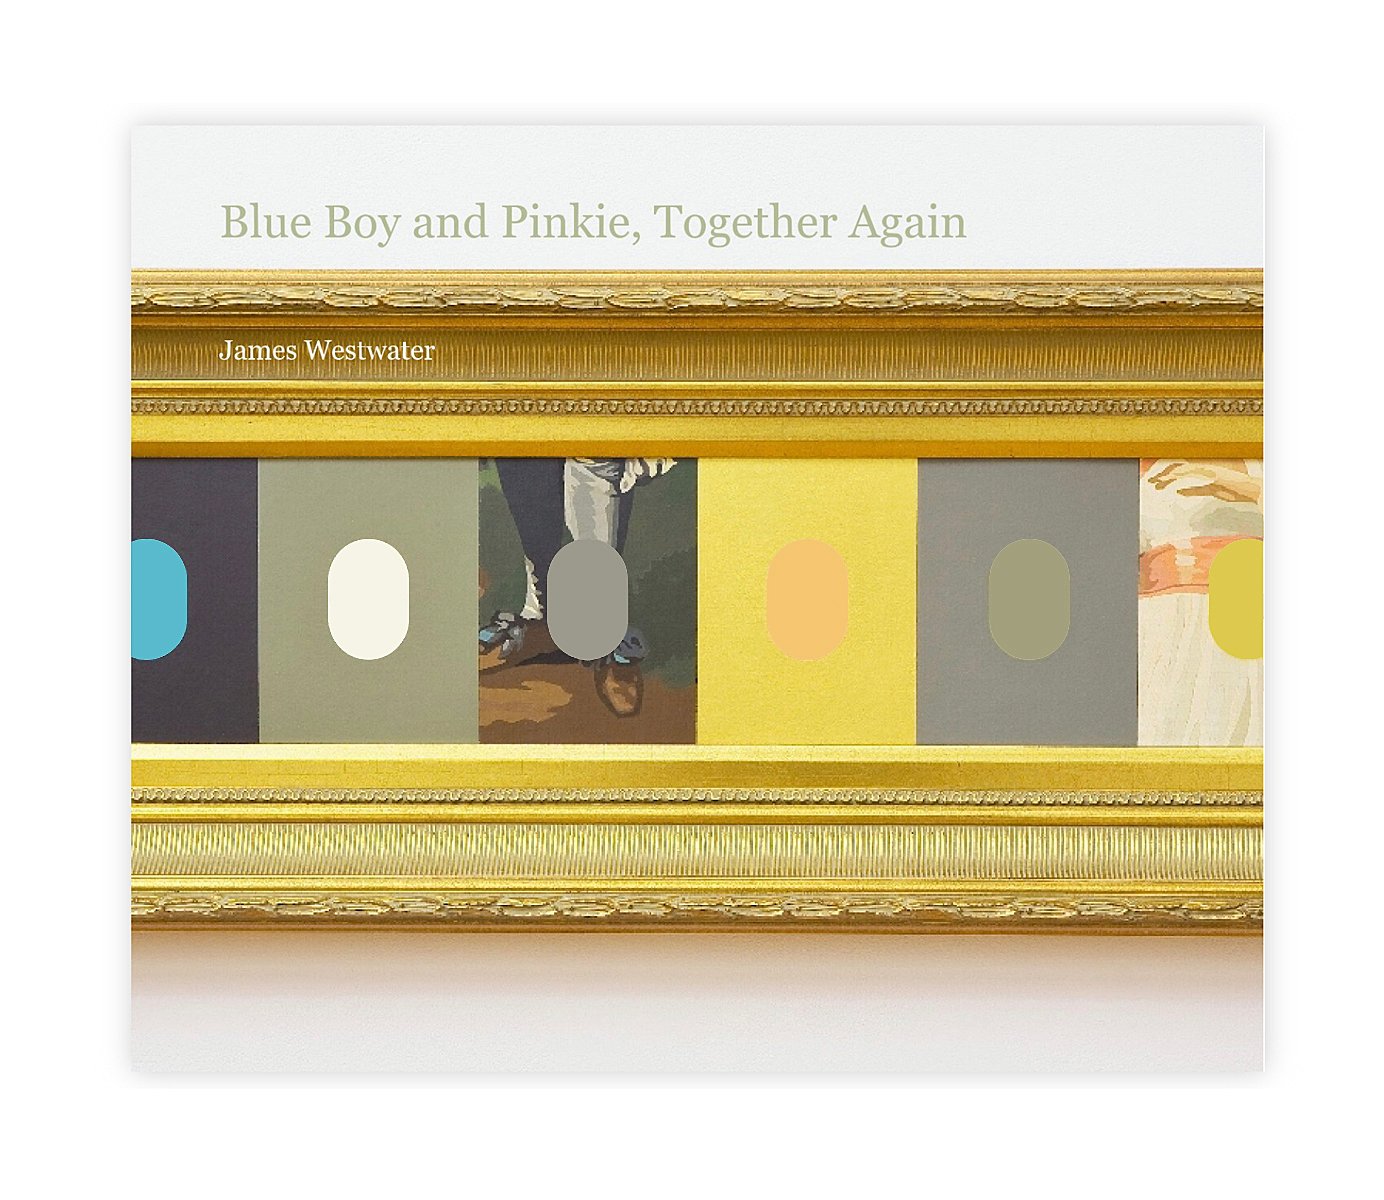 Type reads, “Blue Boy and Pinkie, Together Again,” over a gold framed painting.